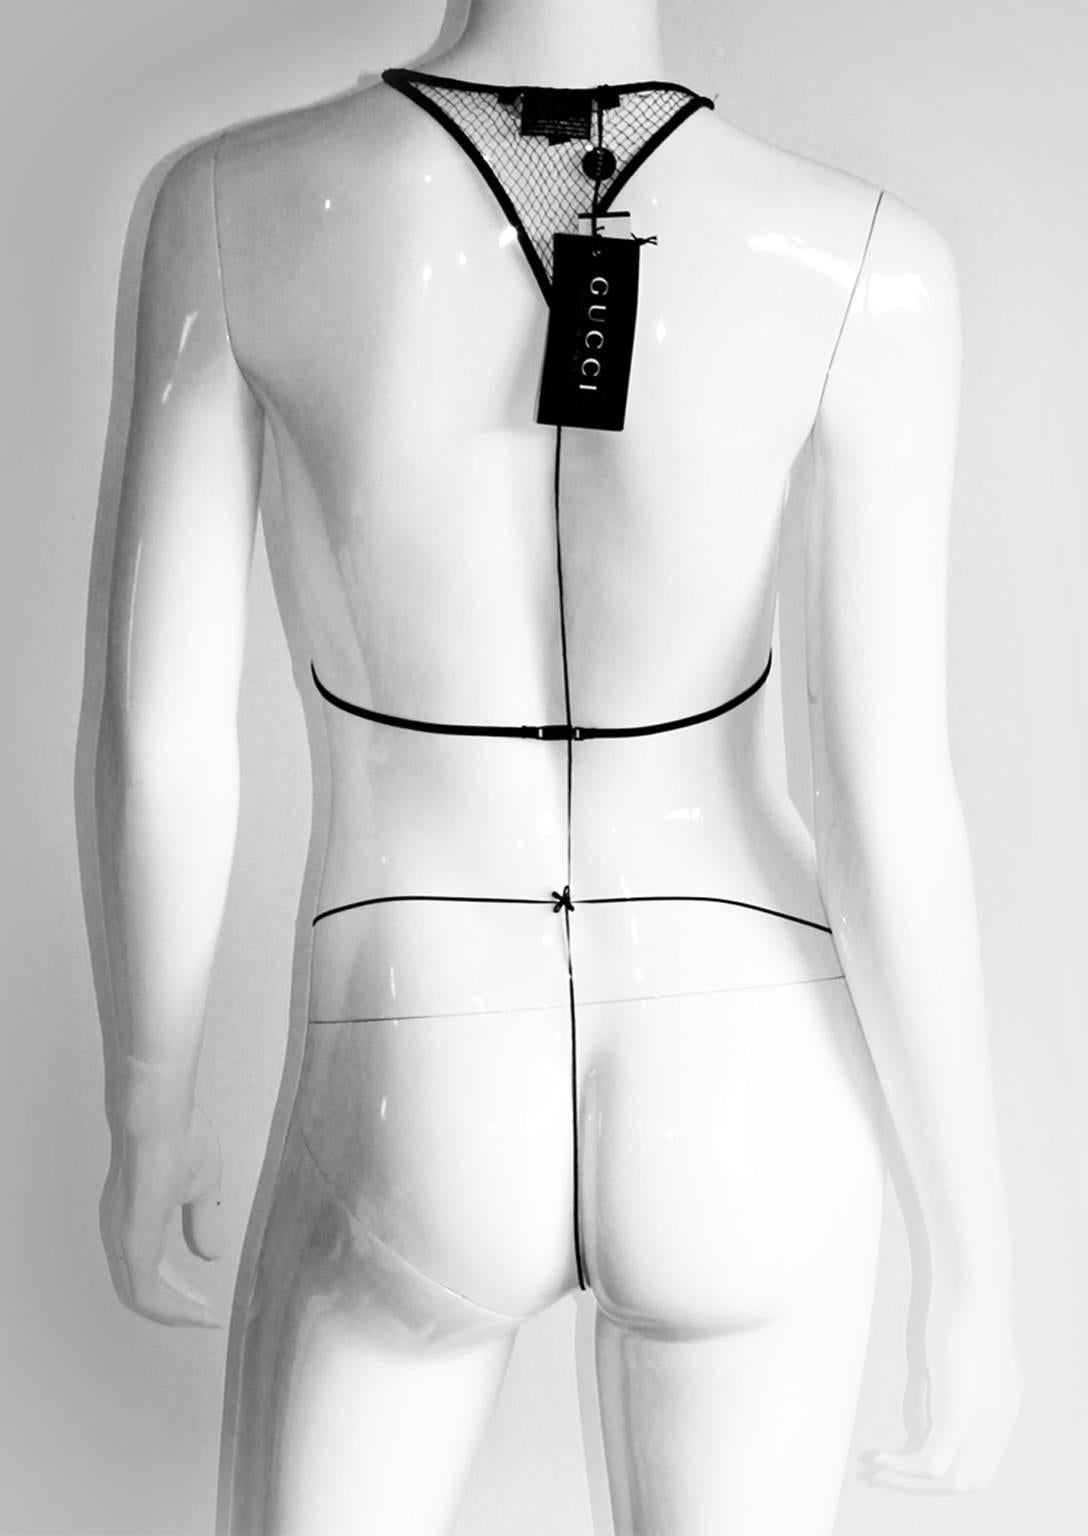 Absolutely Heavenly Tom Ford For Gucci FW 2003 Black Lingerie BNWT

We've been international collectors of Tom Ford for Gucci & YSL since 2005, buying primarily for ourselves &  wholesaling to a number of collectors & re-sellers throughout the U.S